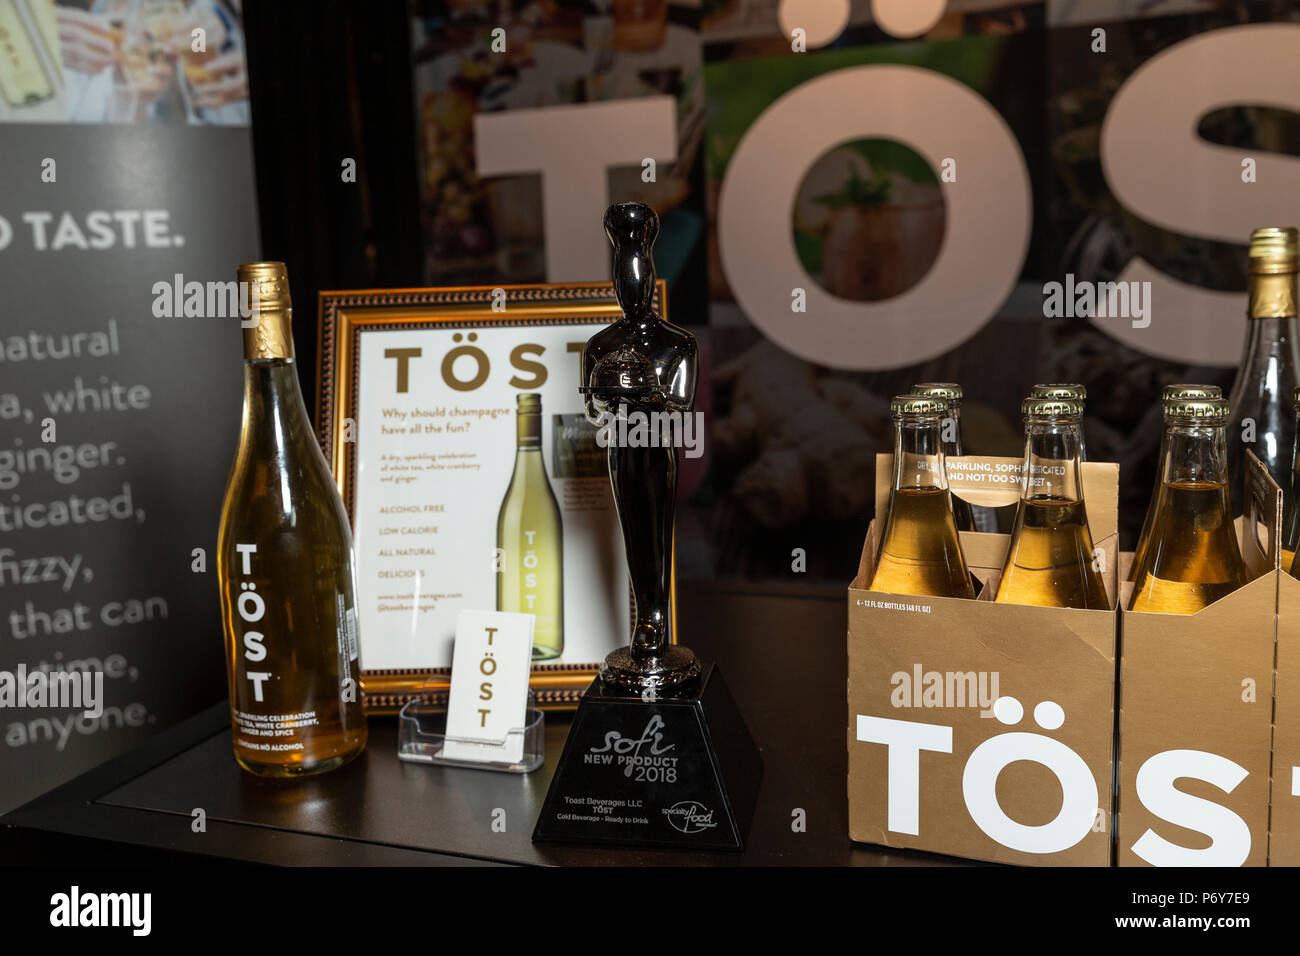 New York, NY - July 1, 2018: SOFI award winner Tost sparkling drink by Tost Beverages on display during New York 2018 Summer Fancy Food Show at Jacob Javits Center Stock Photo